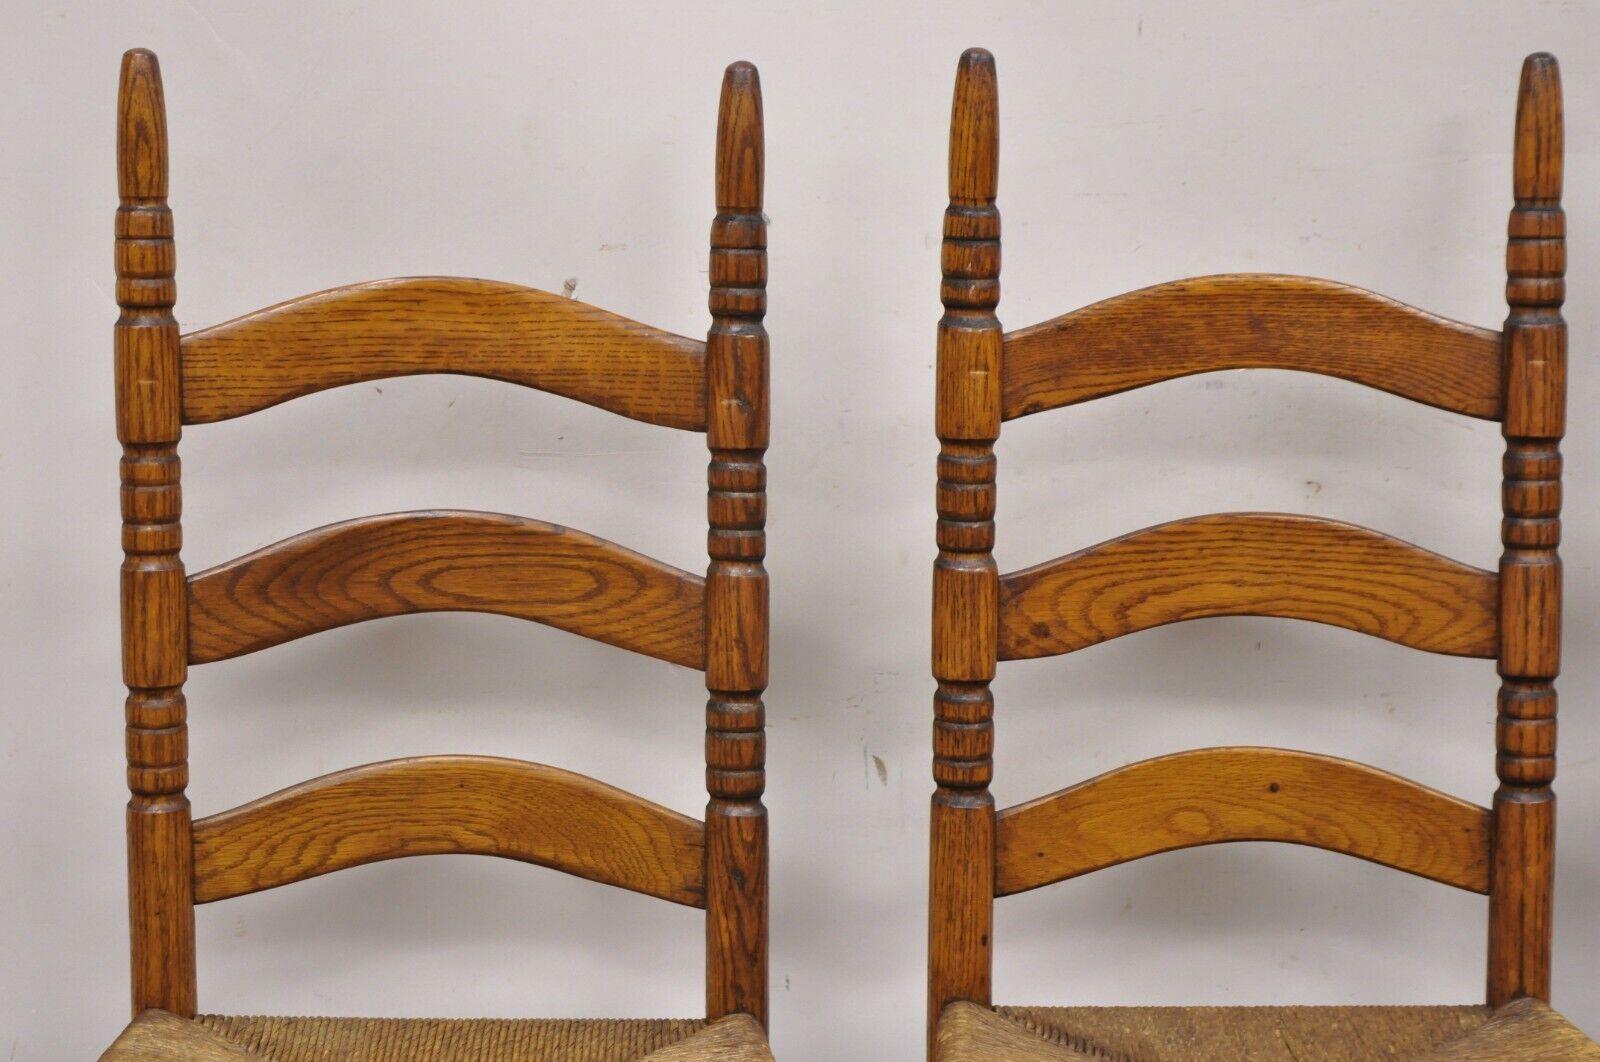 Antique Ladderback Primitive Rustic Oak Wood Rush Seat Dining Chairs - Set of 4. Item featured is a nice smaller size, turn carved pointed finials, woven rope cord 